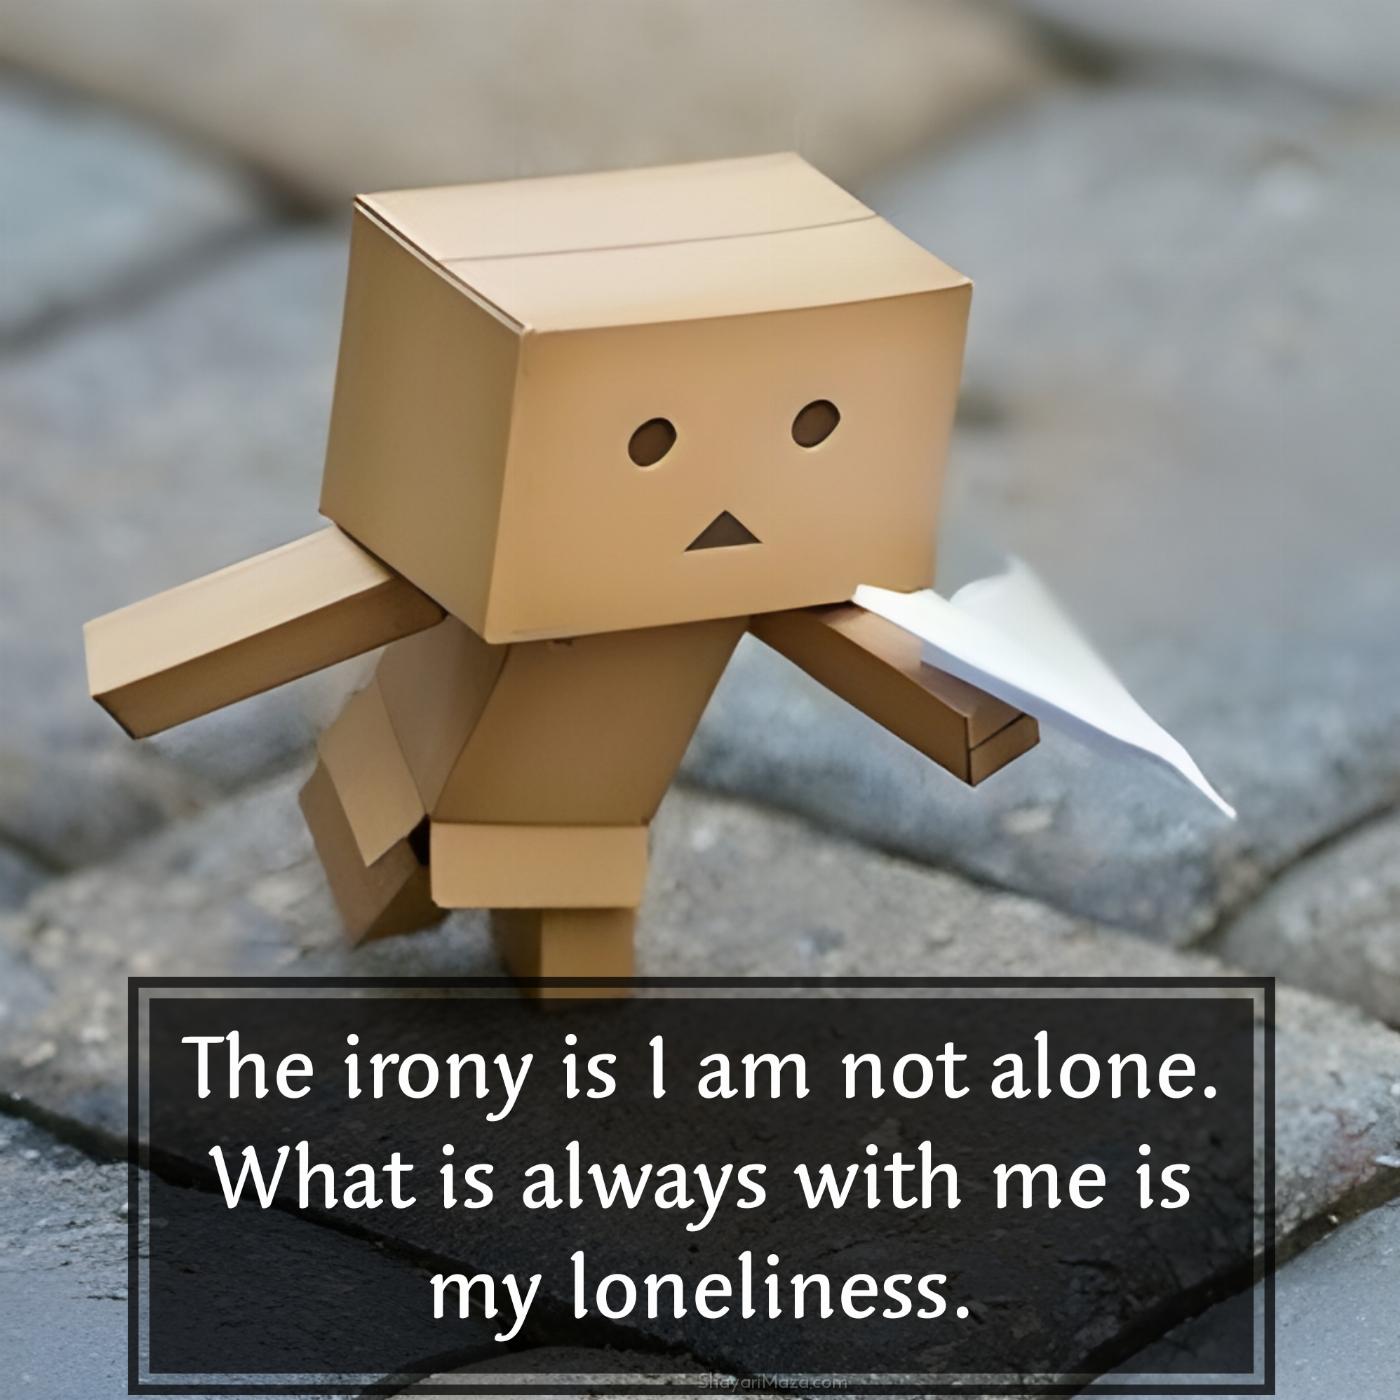 The irony is I am not alone What is always with me